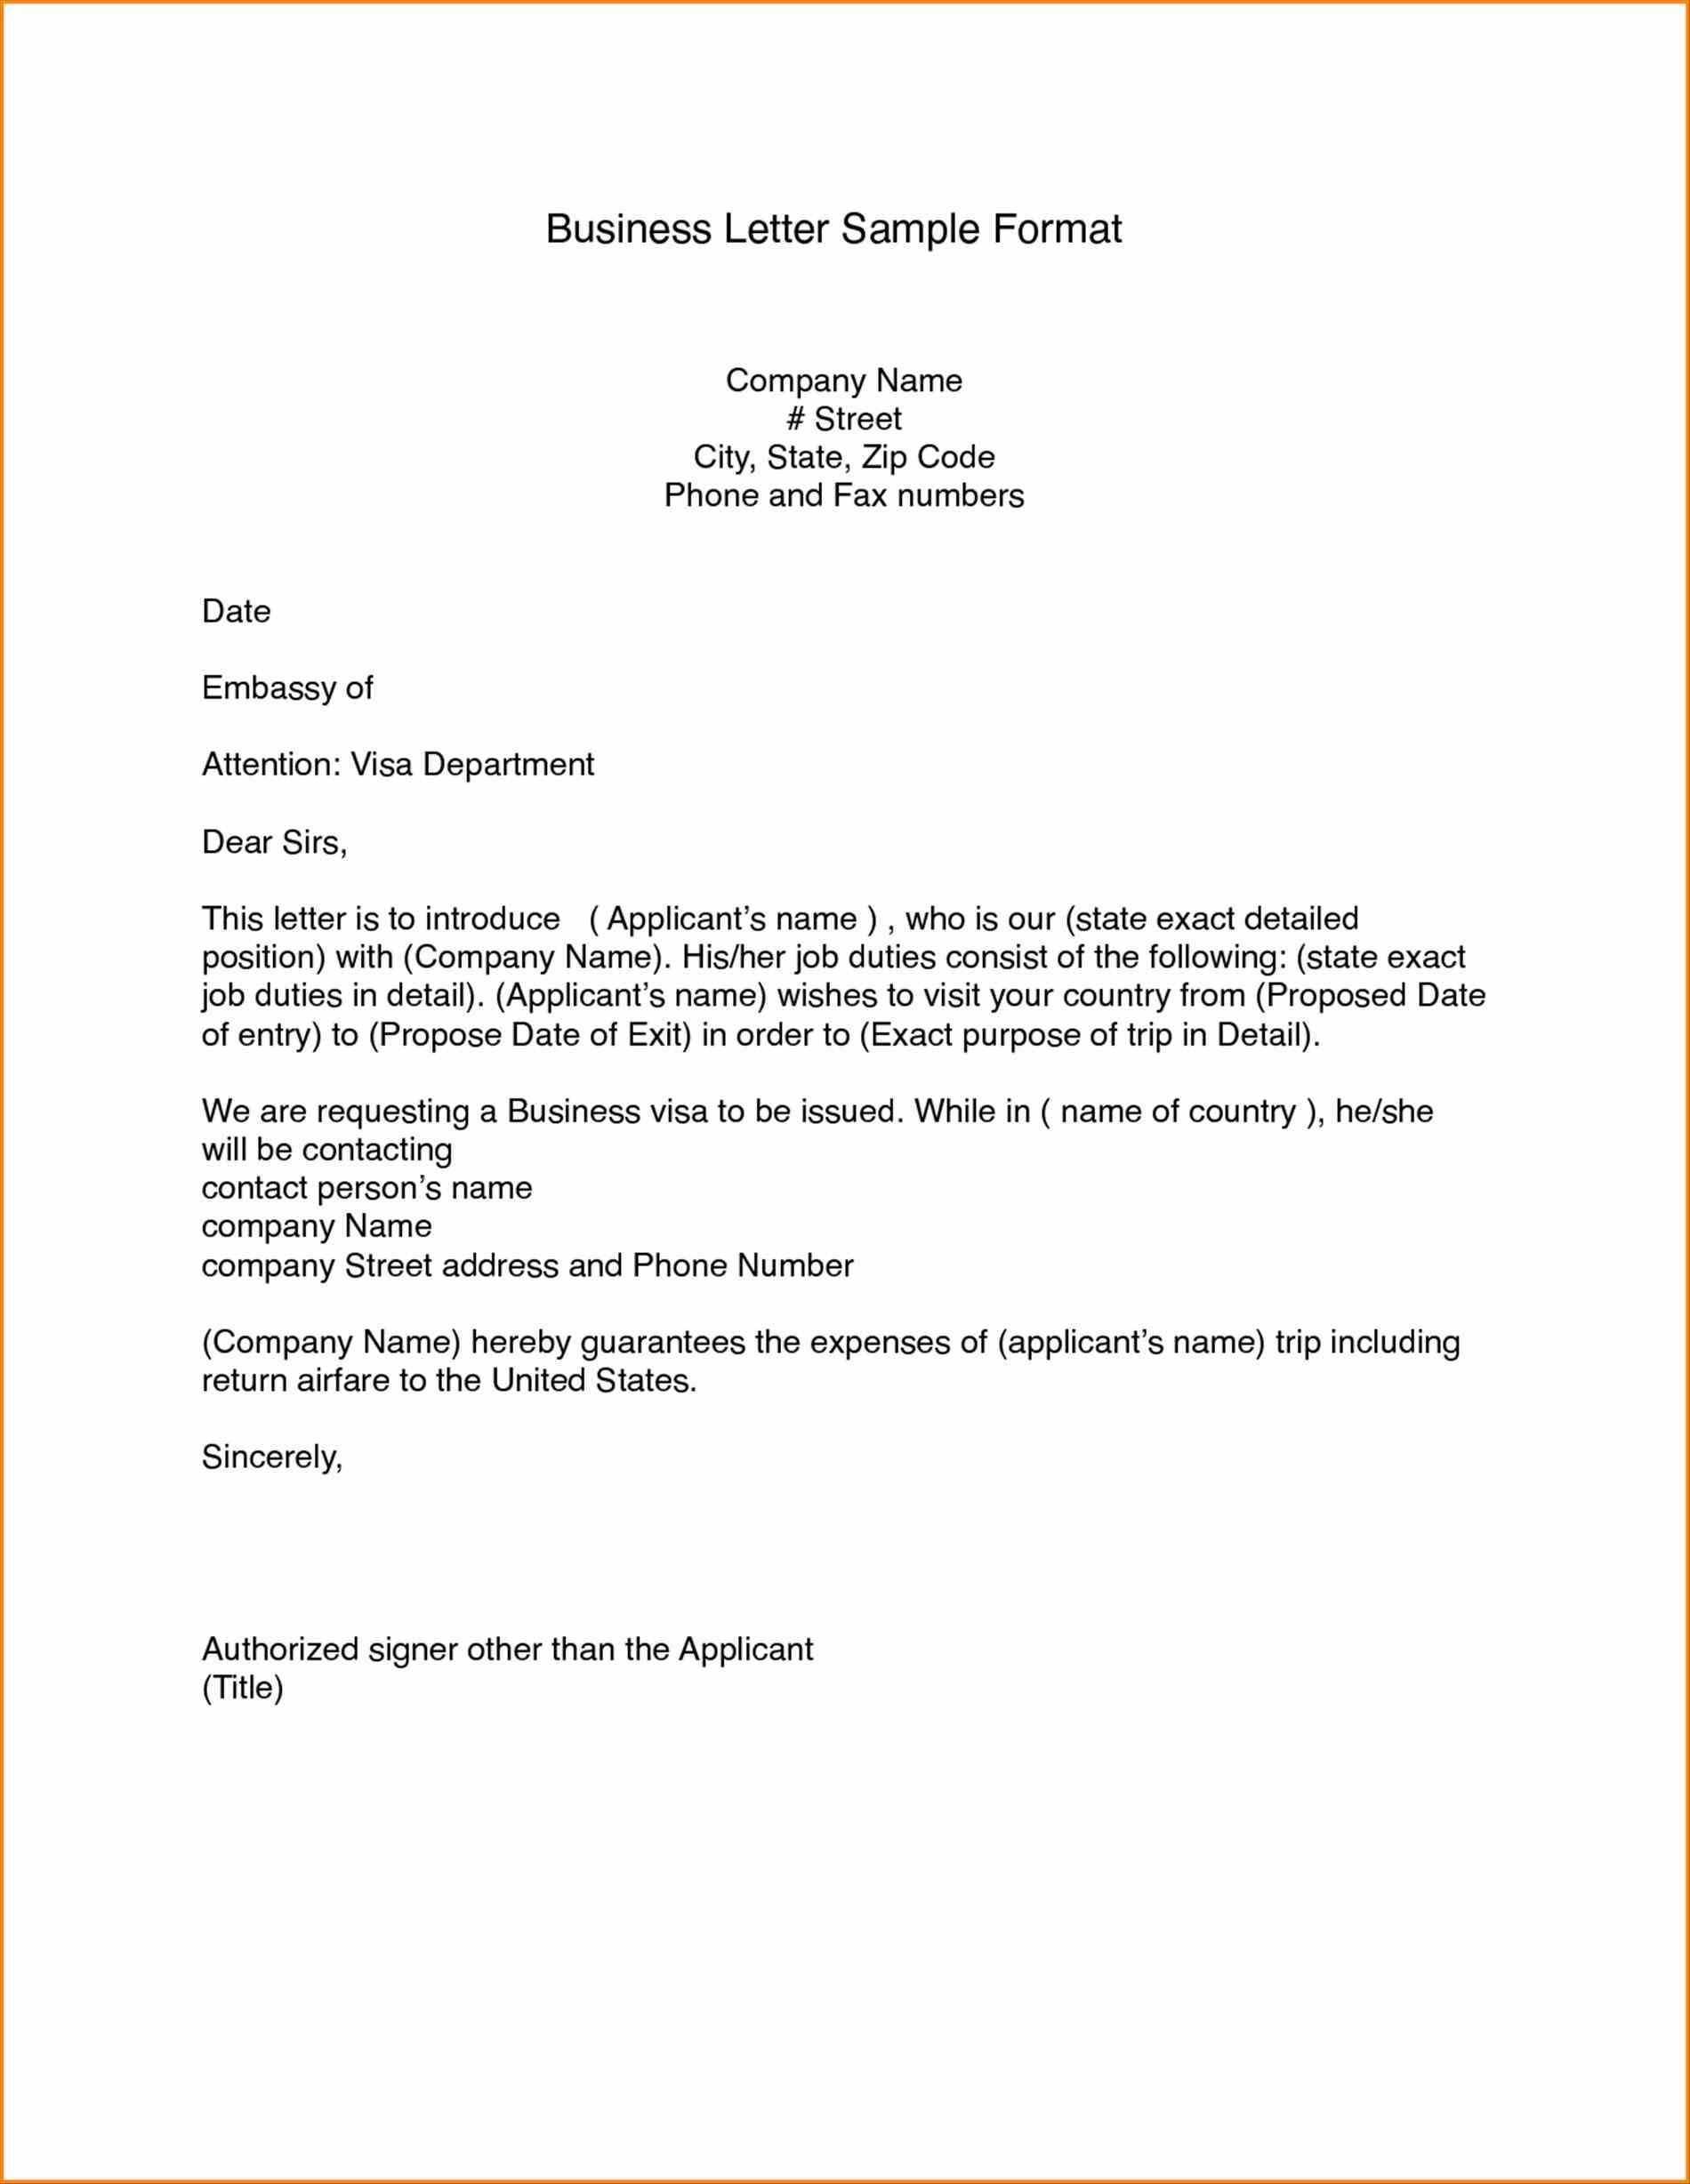 Microsoft Office Business Letter Template from legaldbol.com